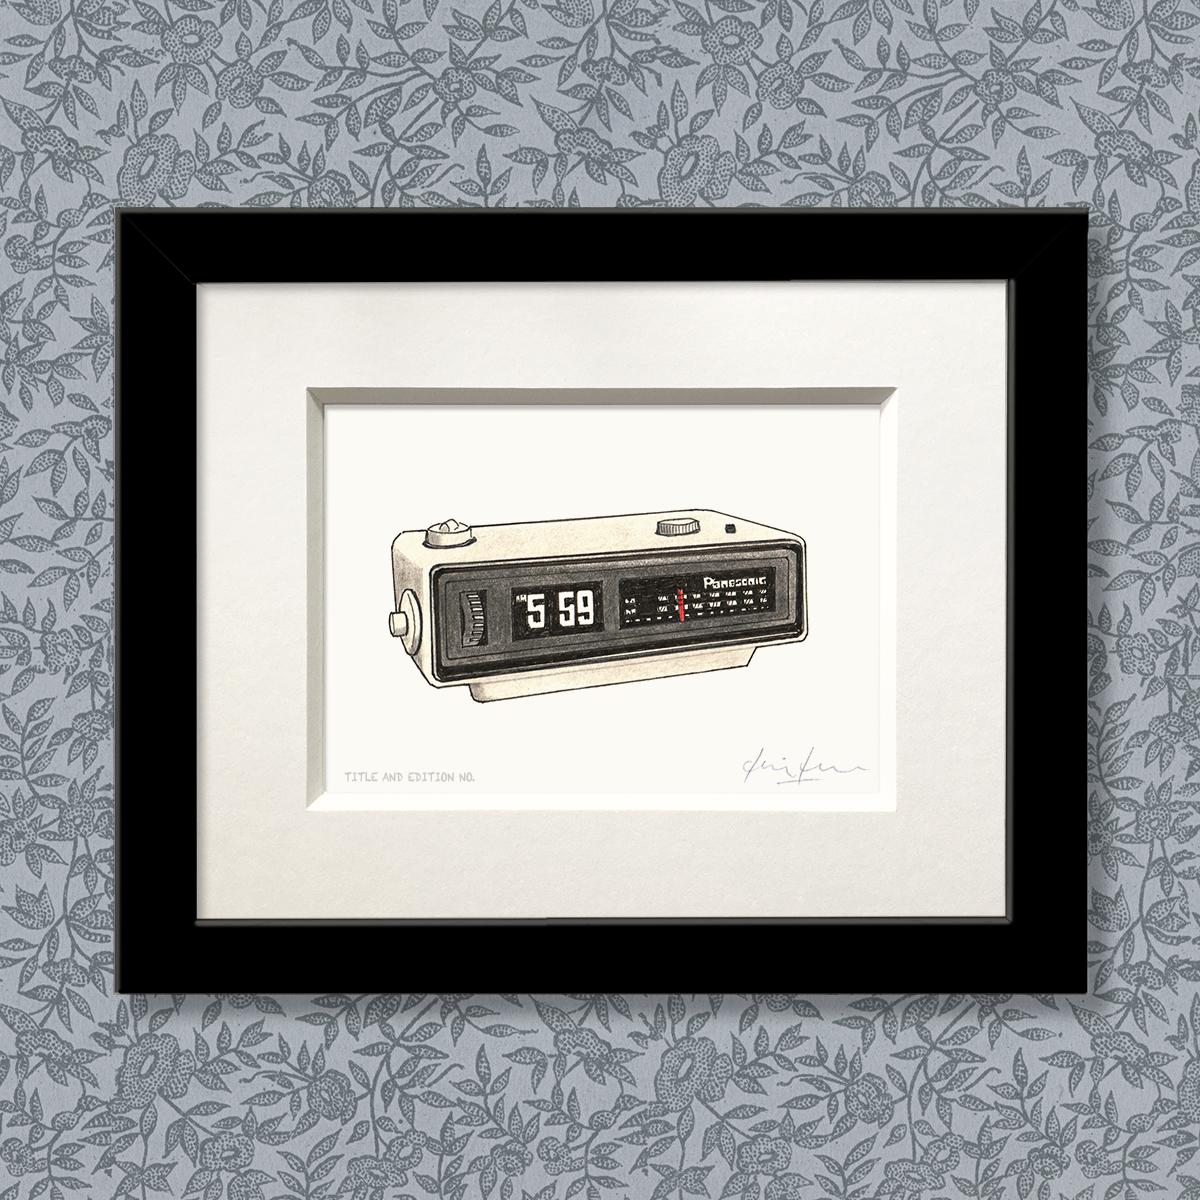 Limited edition print from a pen, ink and coloured pencil drawing of the alarm radio from the film Groundhog Day in a black frame